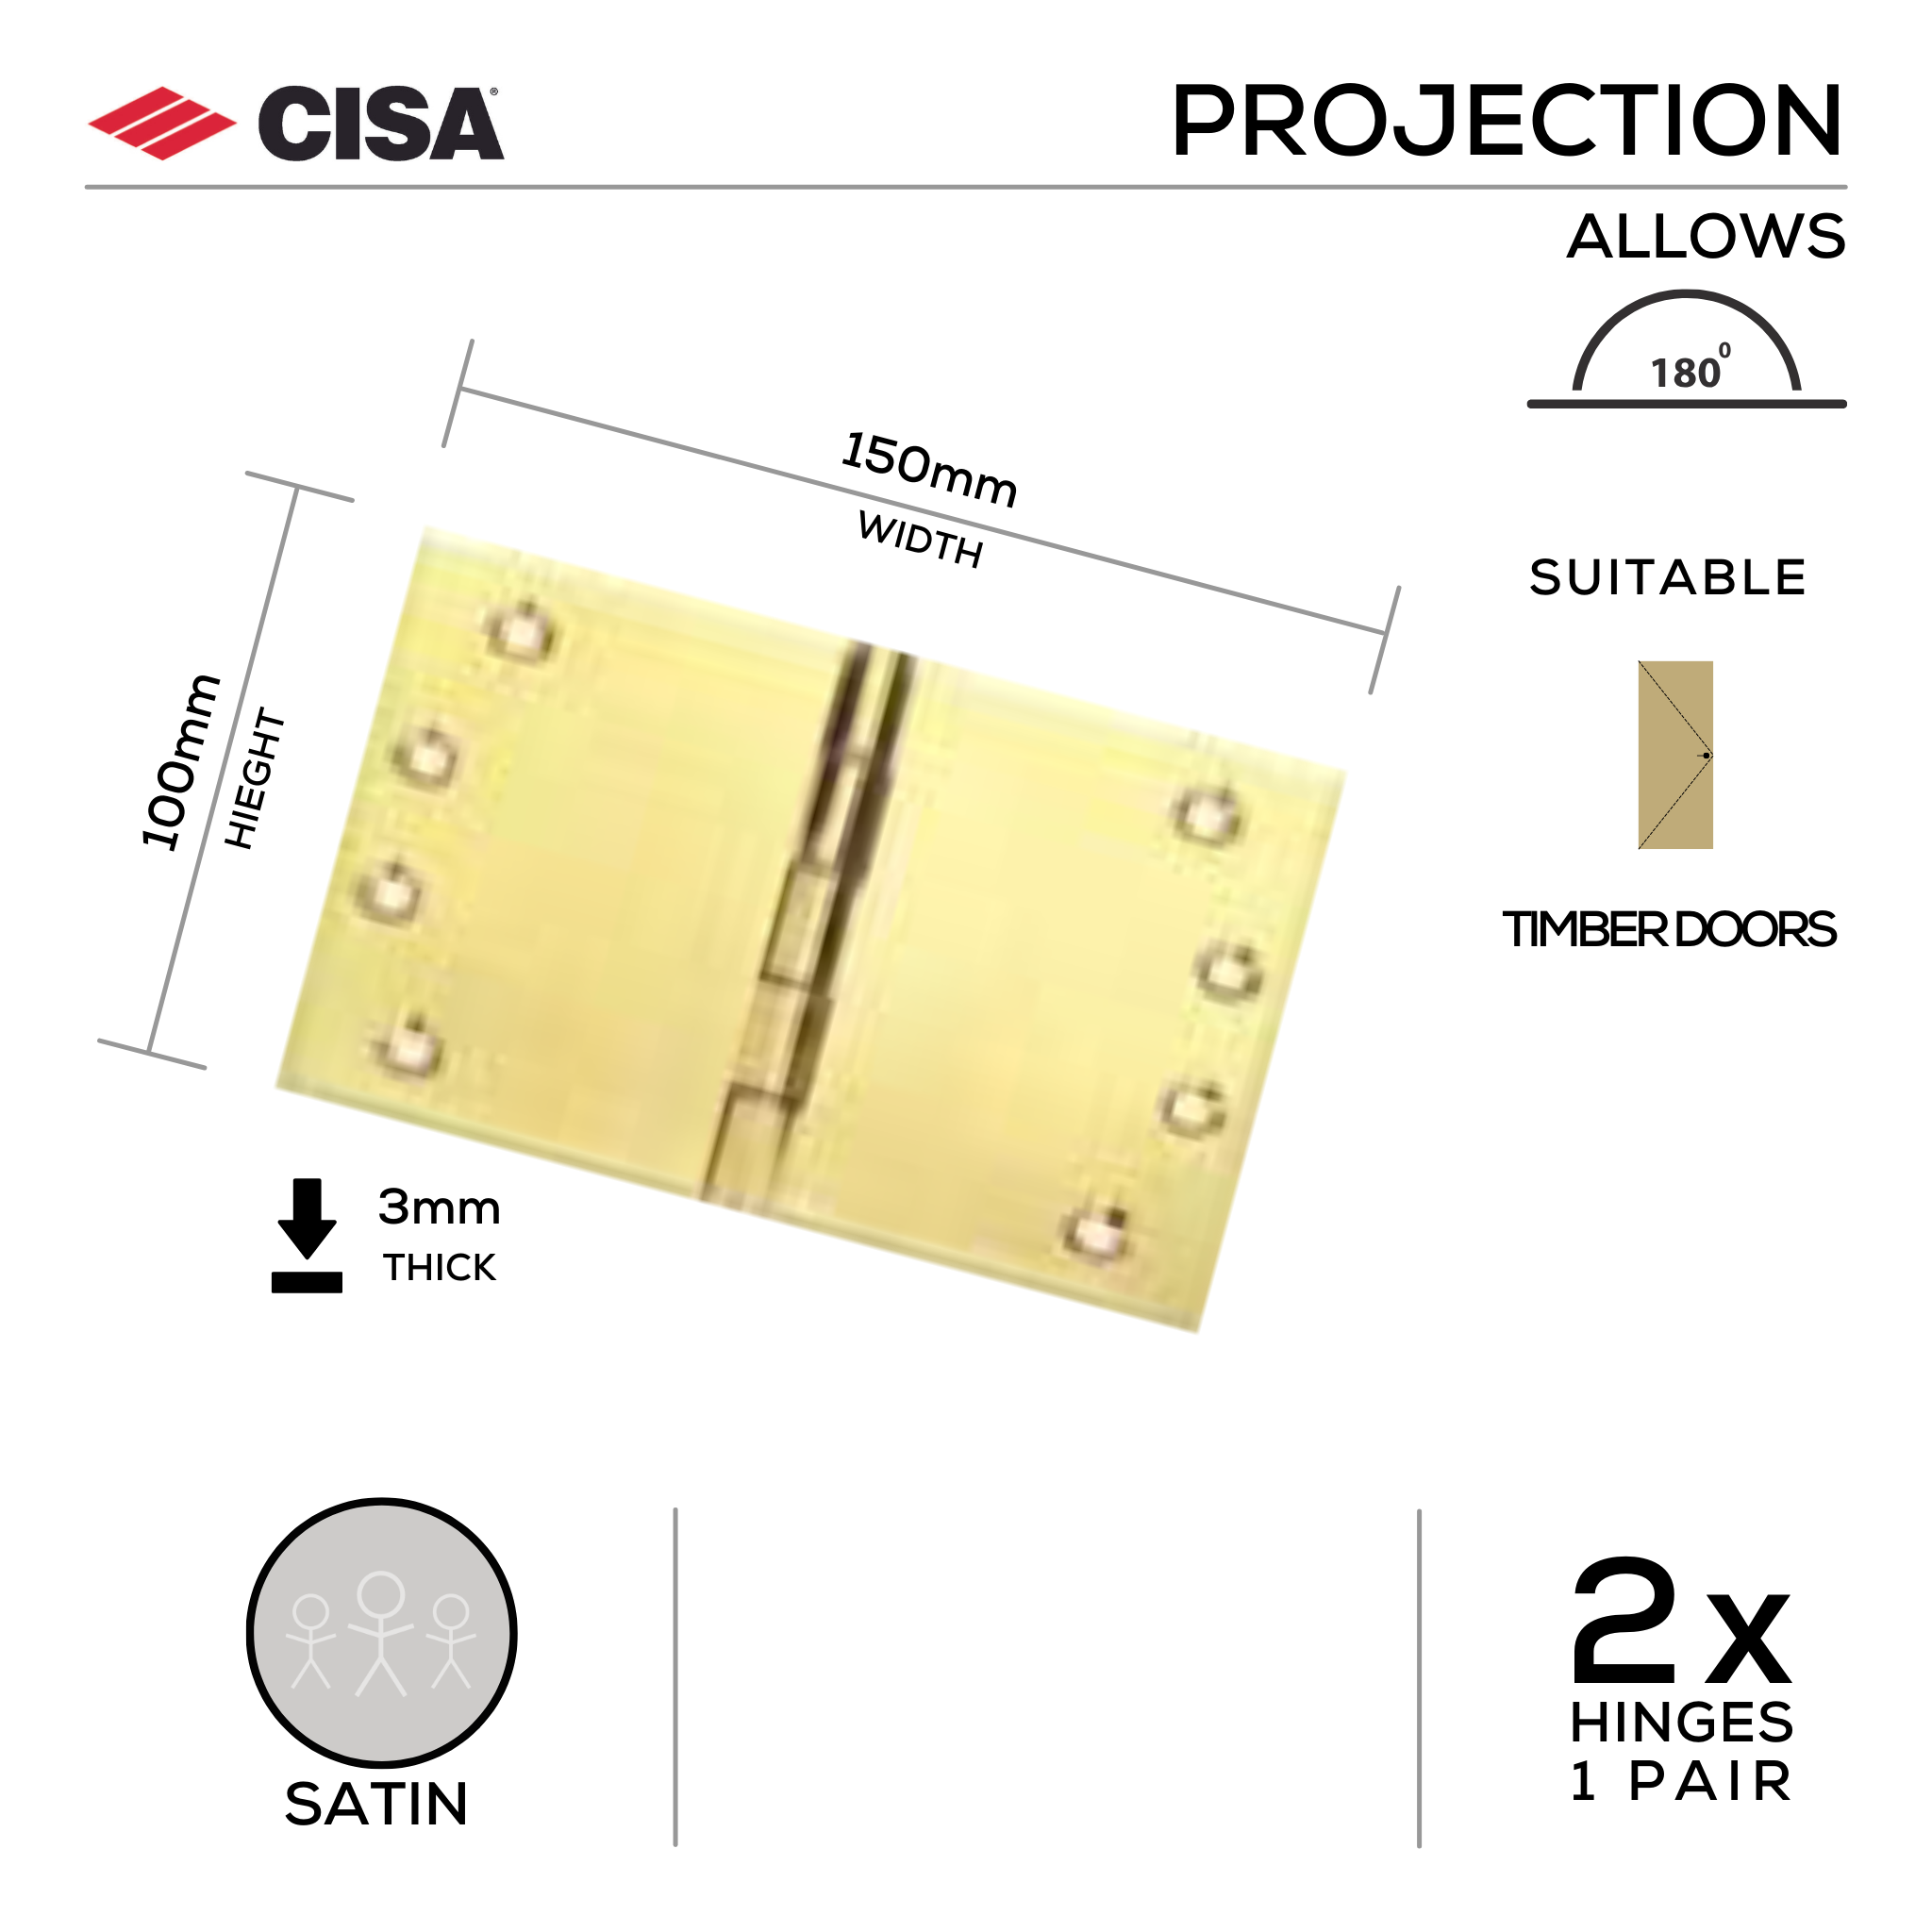 FH150X3, Projection Hinge, 2 x Hinges (1 Pair), 100mm (h) x 150mm (w) x 3mm (t), Satin, CISA